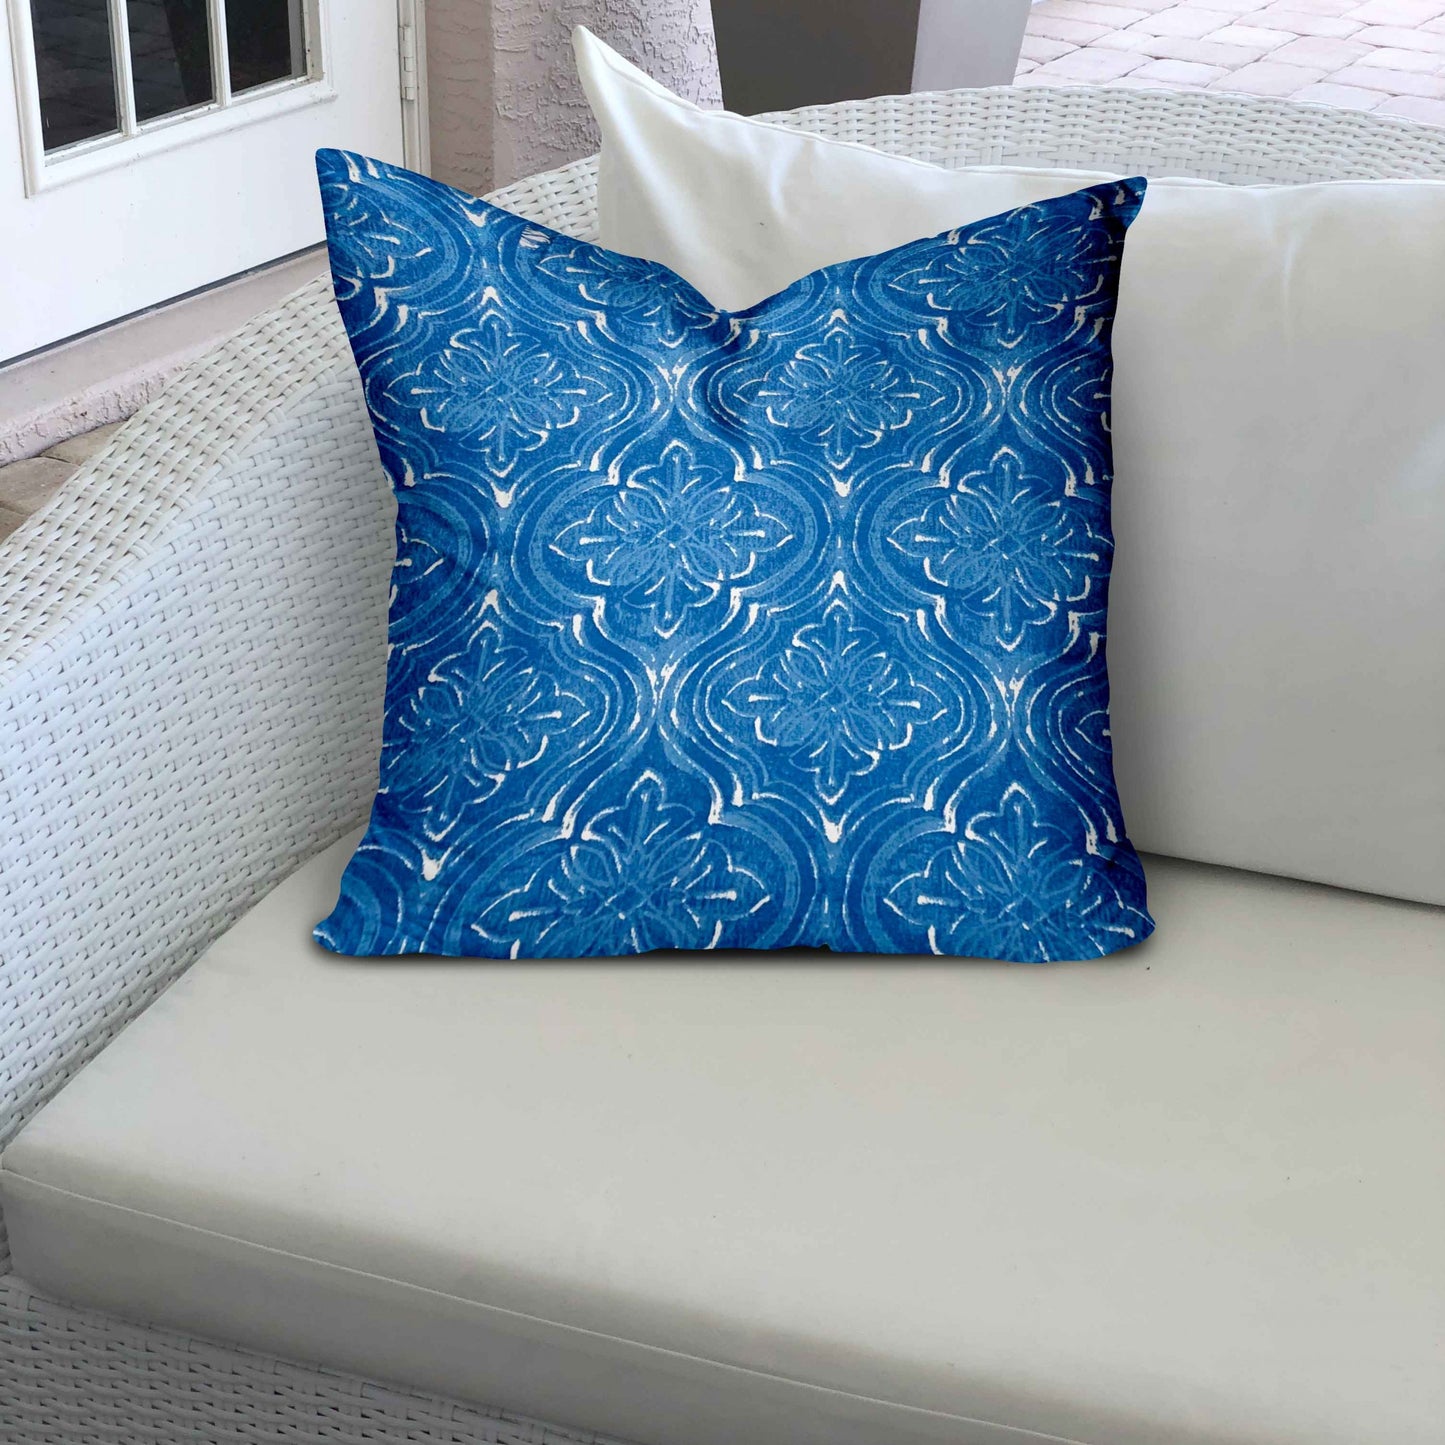 20" X 20" Blue And White Zippered Ikat Throw Indoor Outdoor Pillow